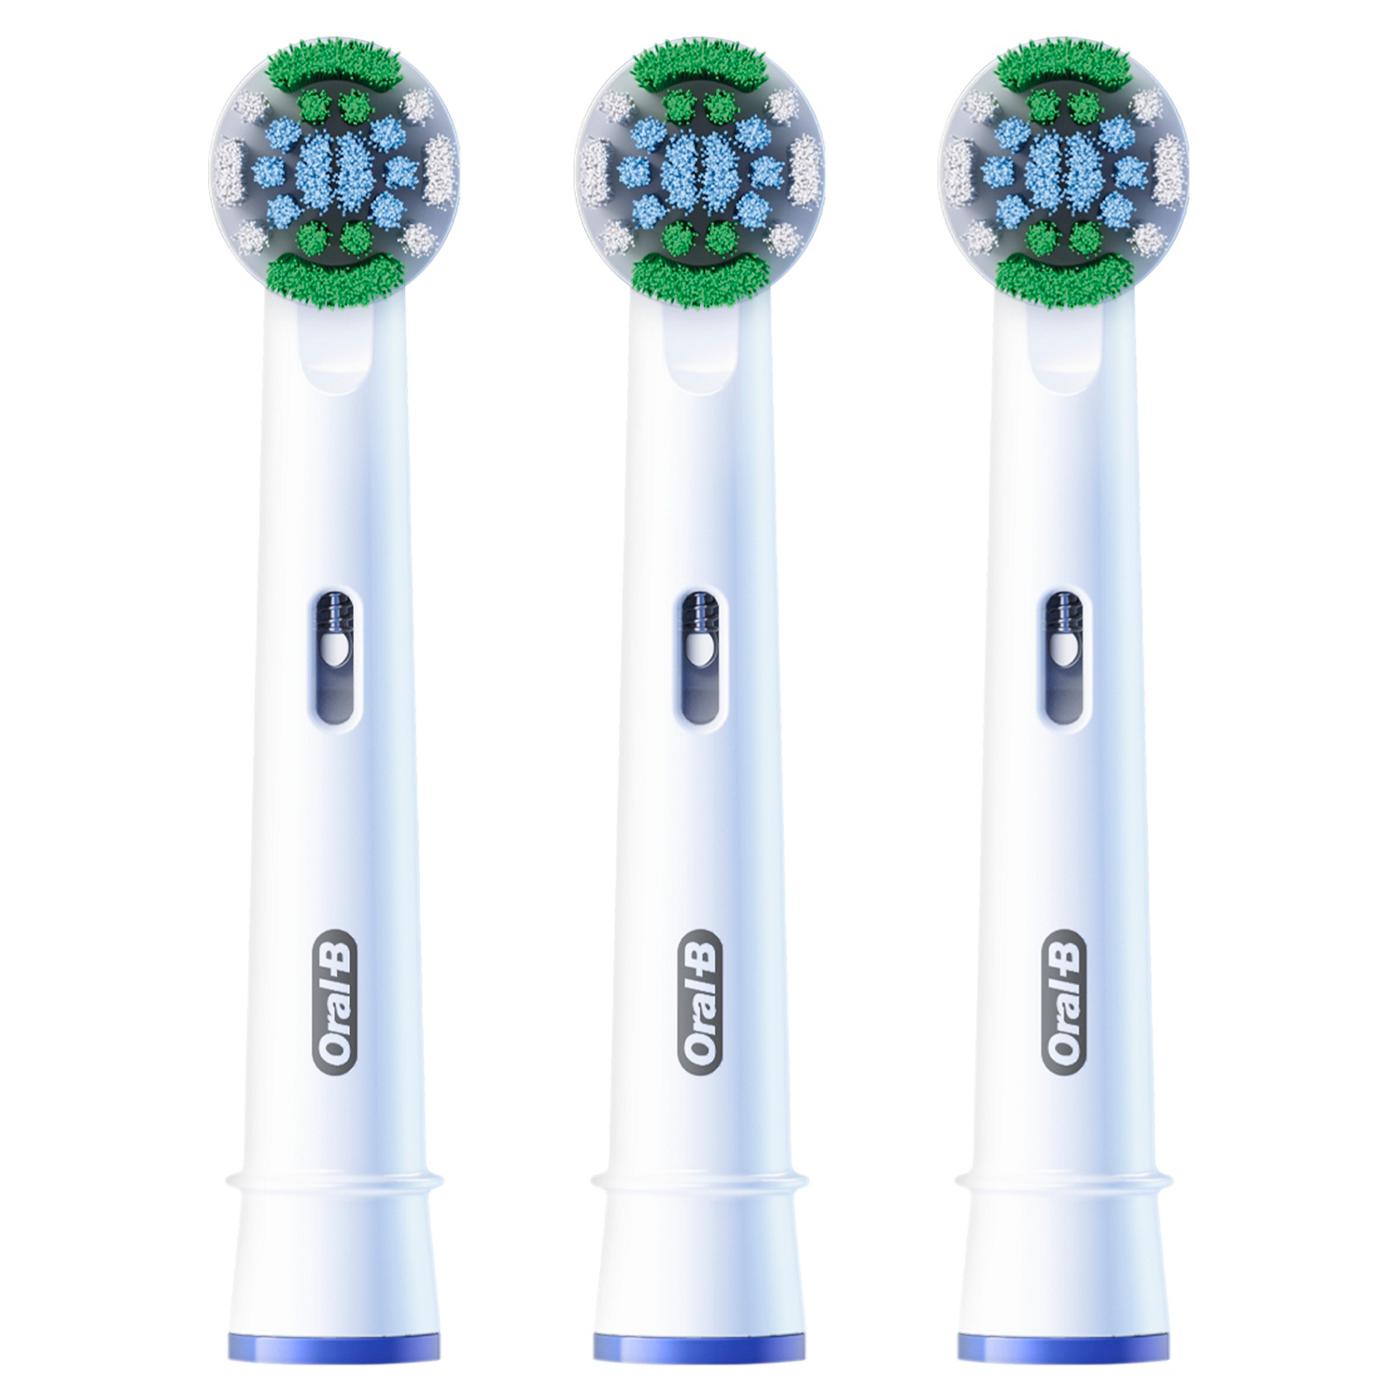 Oral-B Precision Clean Replacement Electric Toothbrush Heads; image 8 of 9